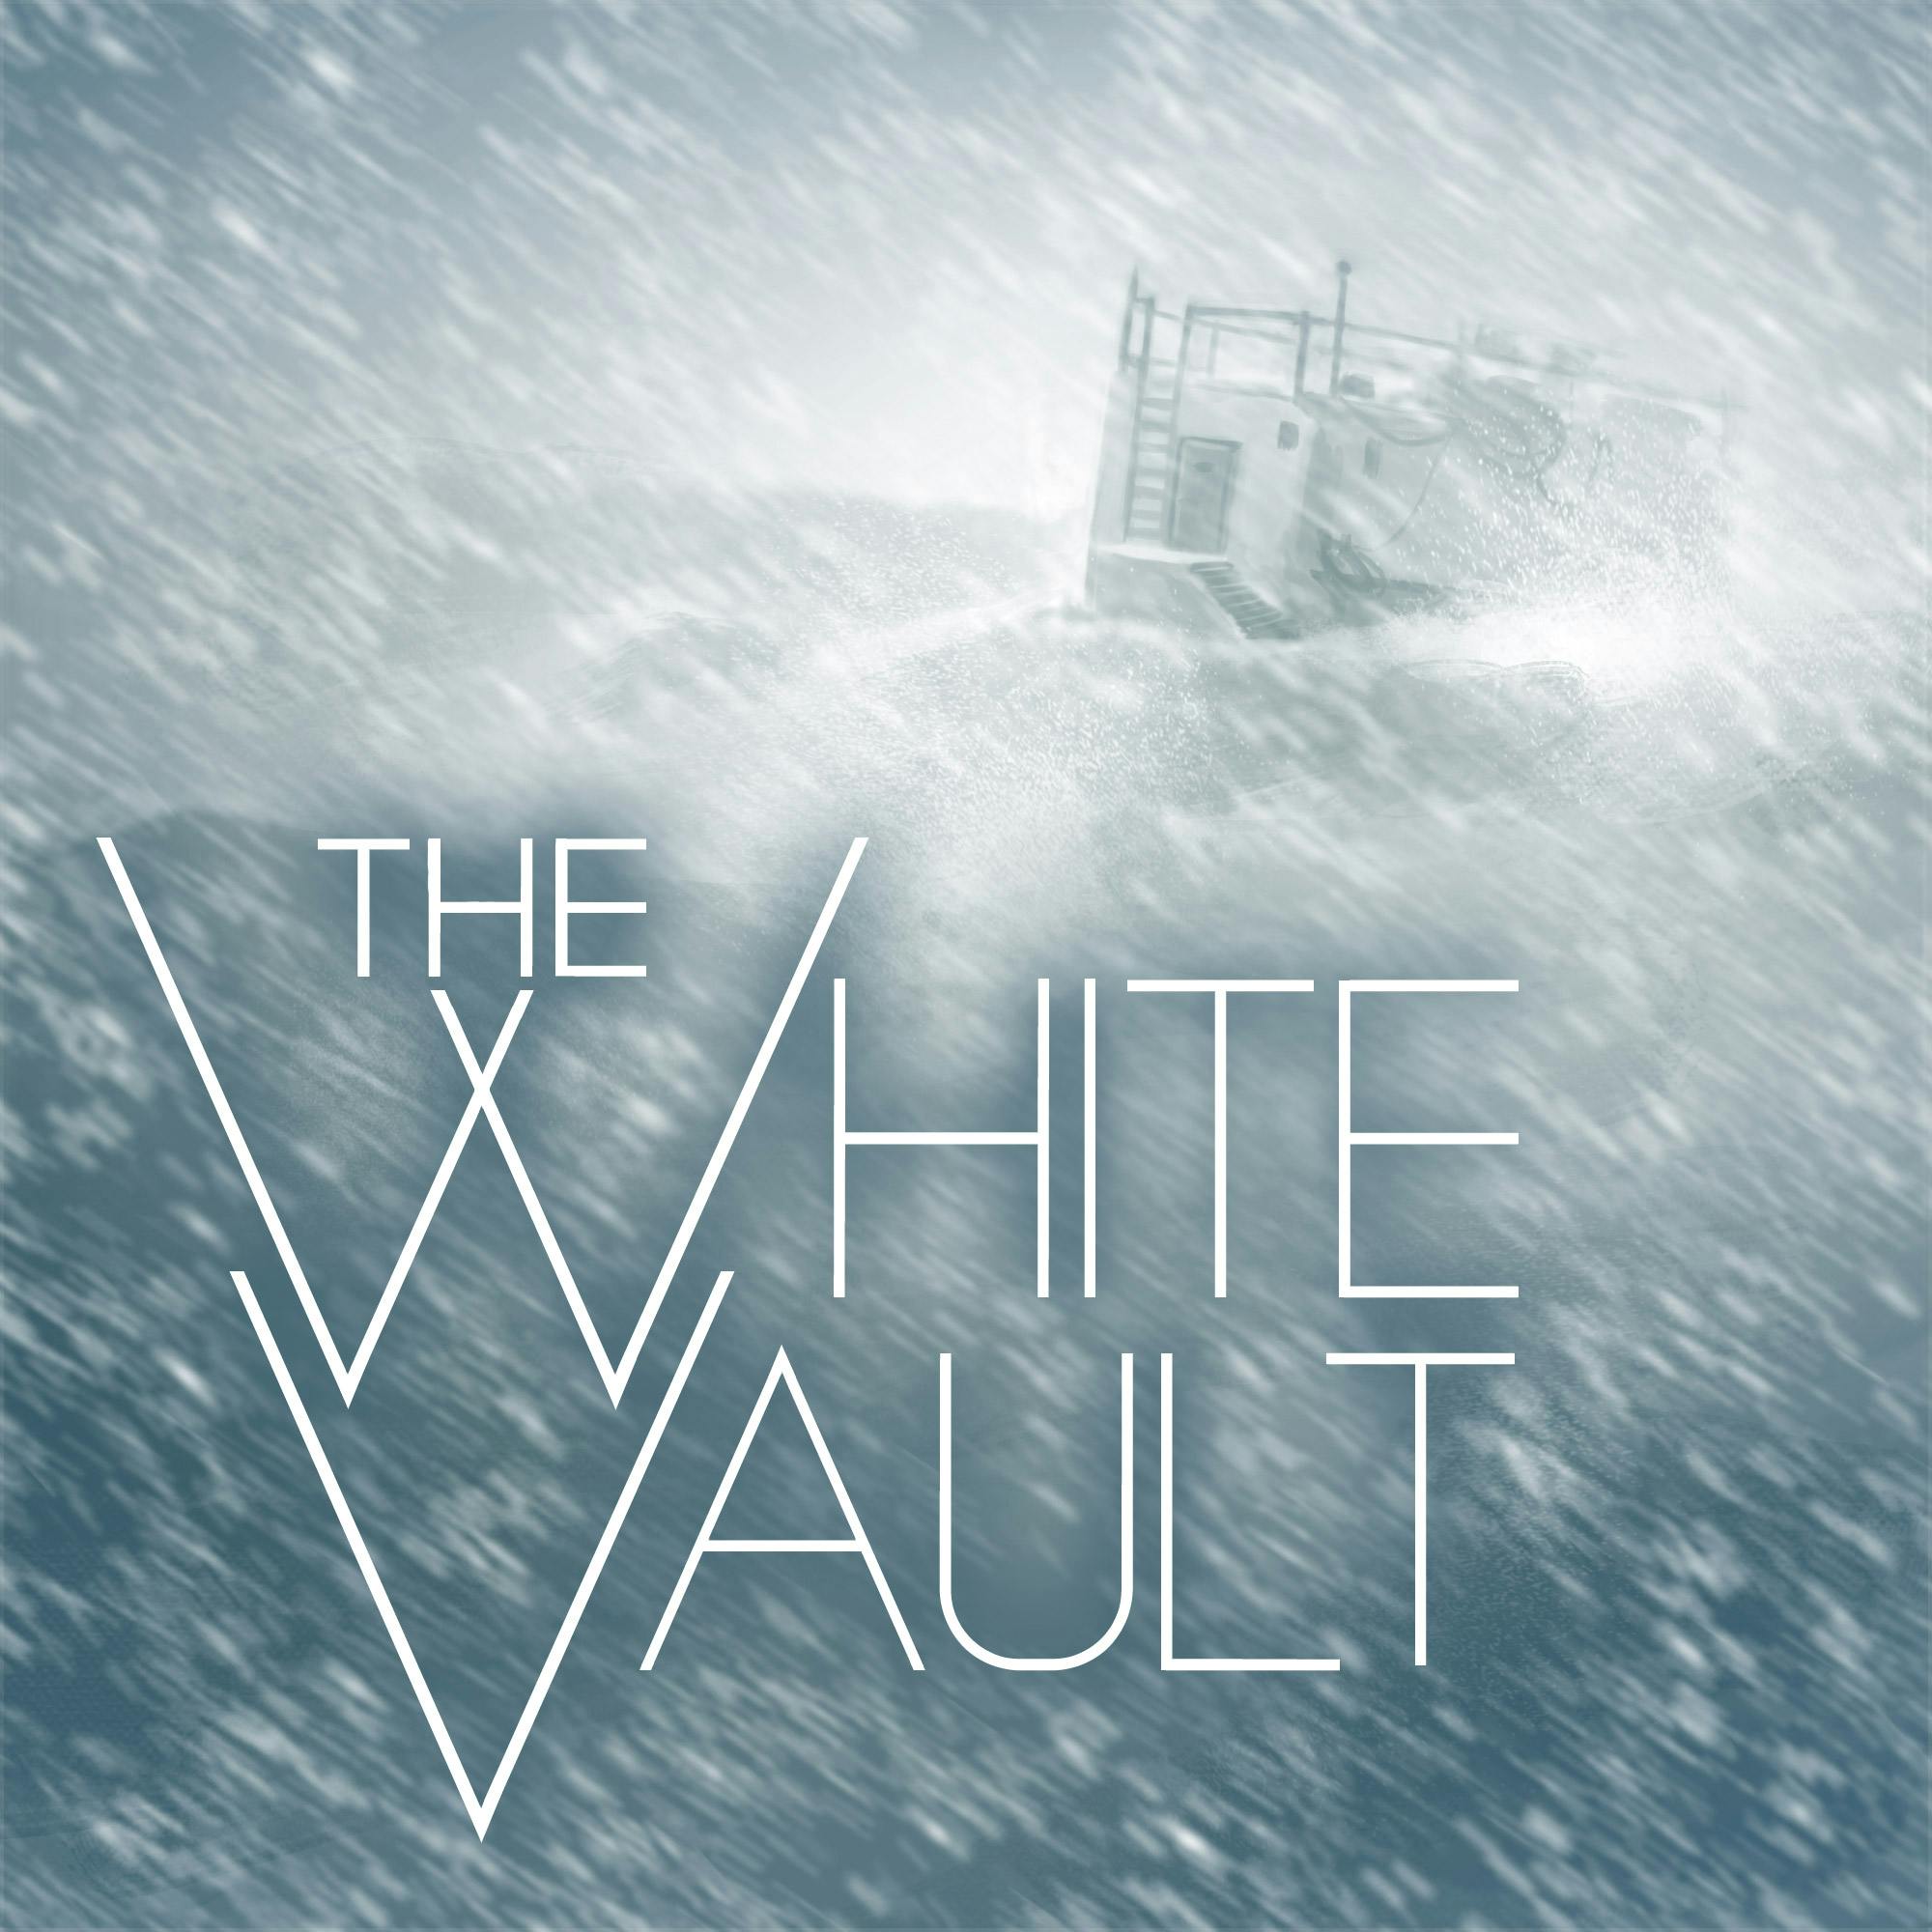 Introducing | The White Vault